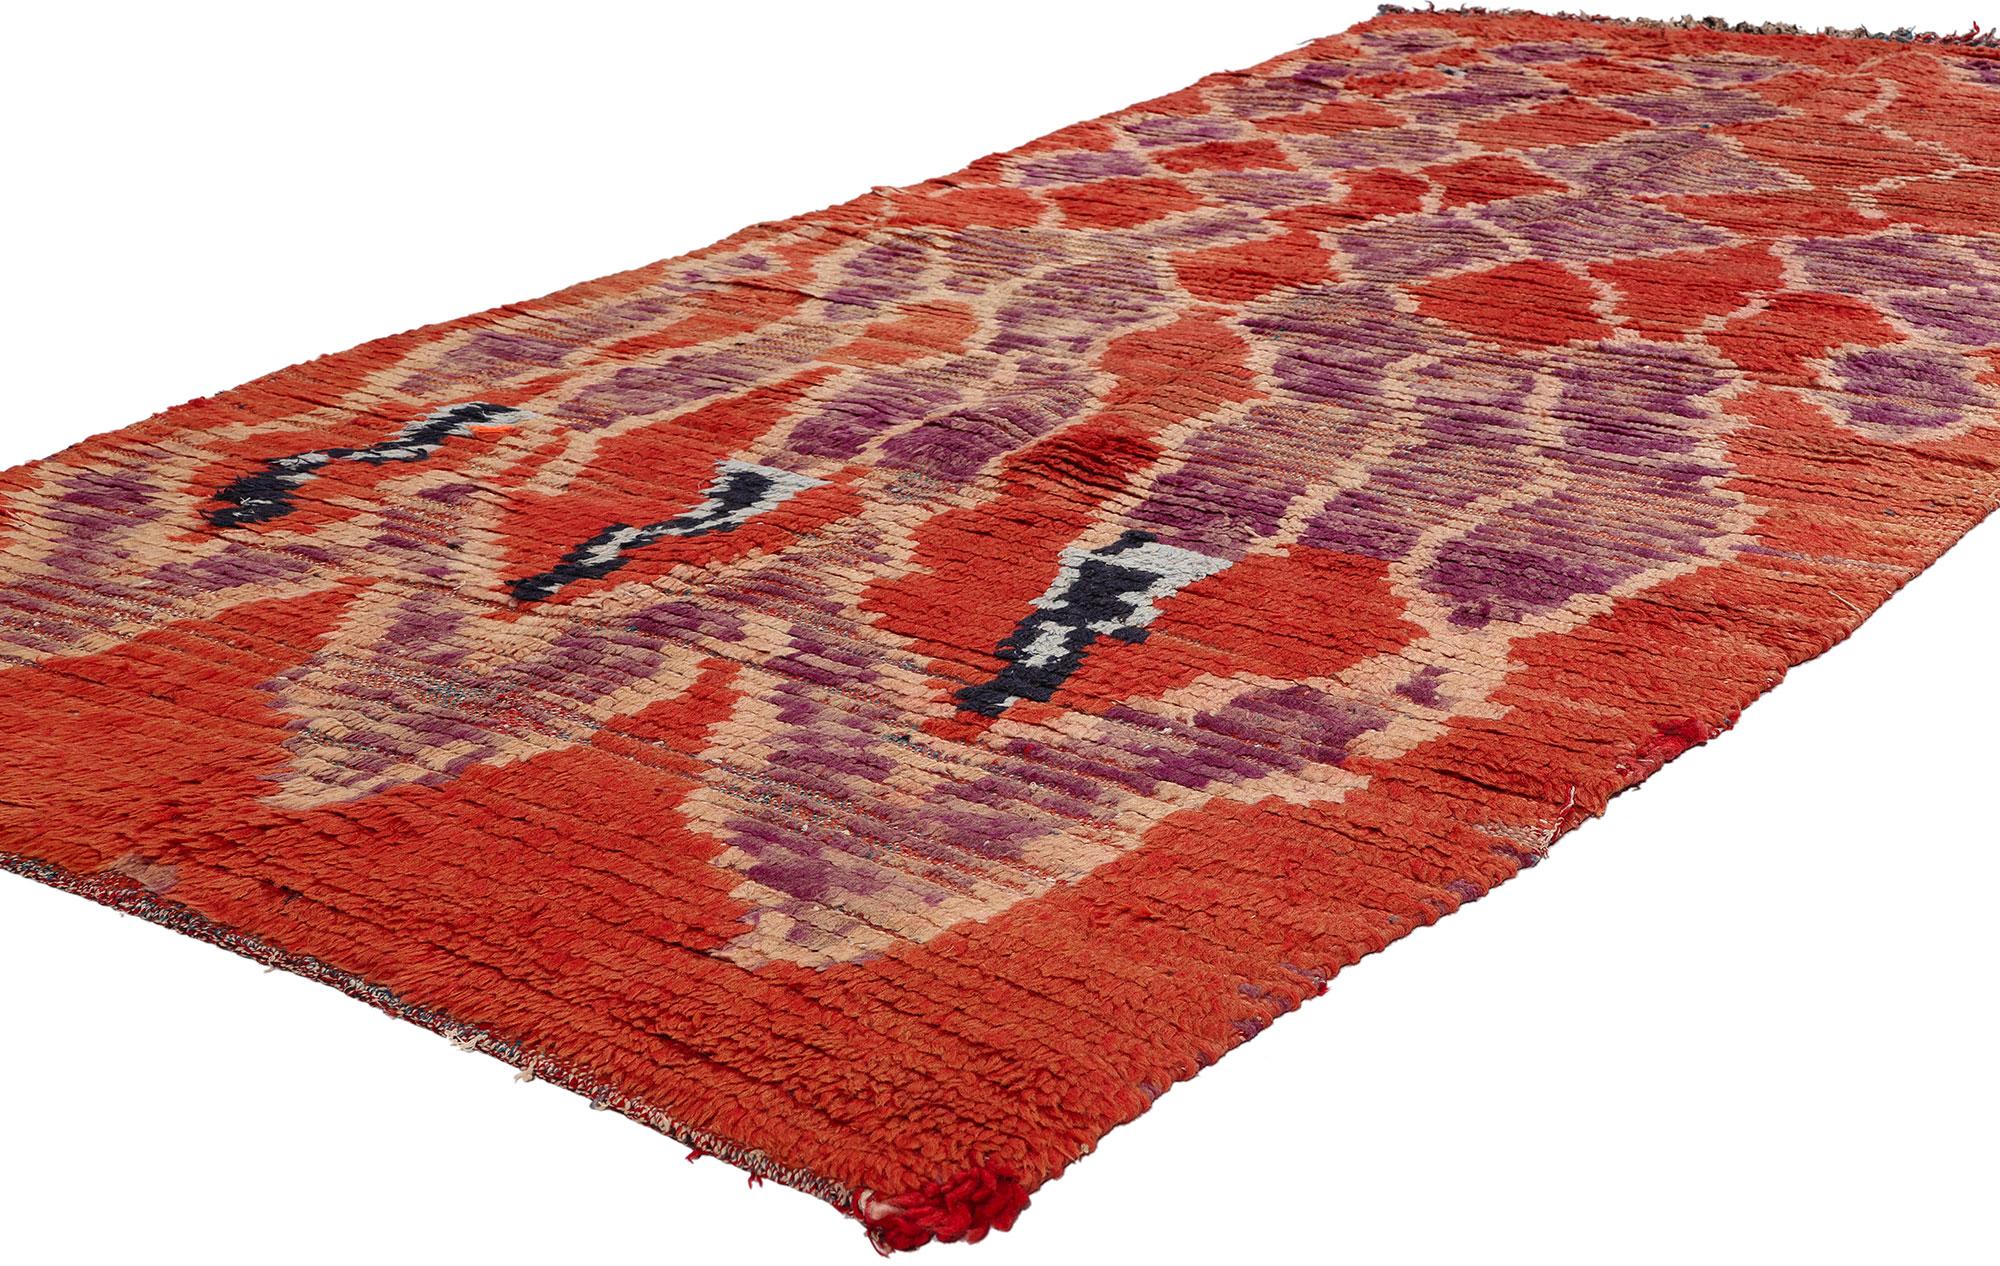 21734 Vintage Red Moroccan Azilal Rug, 03'10 x 08'02. Red Moroccan Azilal rugs are a type of traditional Moroccan rug handwoven by Berber artisans in the Azilal region of Morocco, distinguished by their vibrant red color palette. These rugs